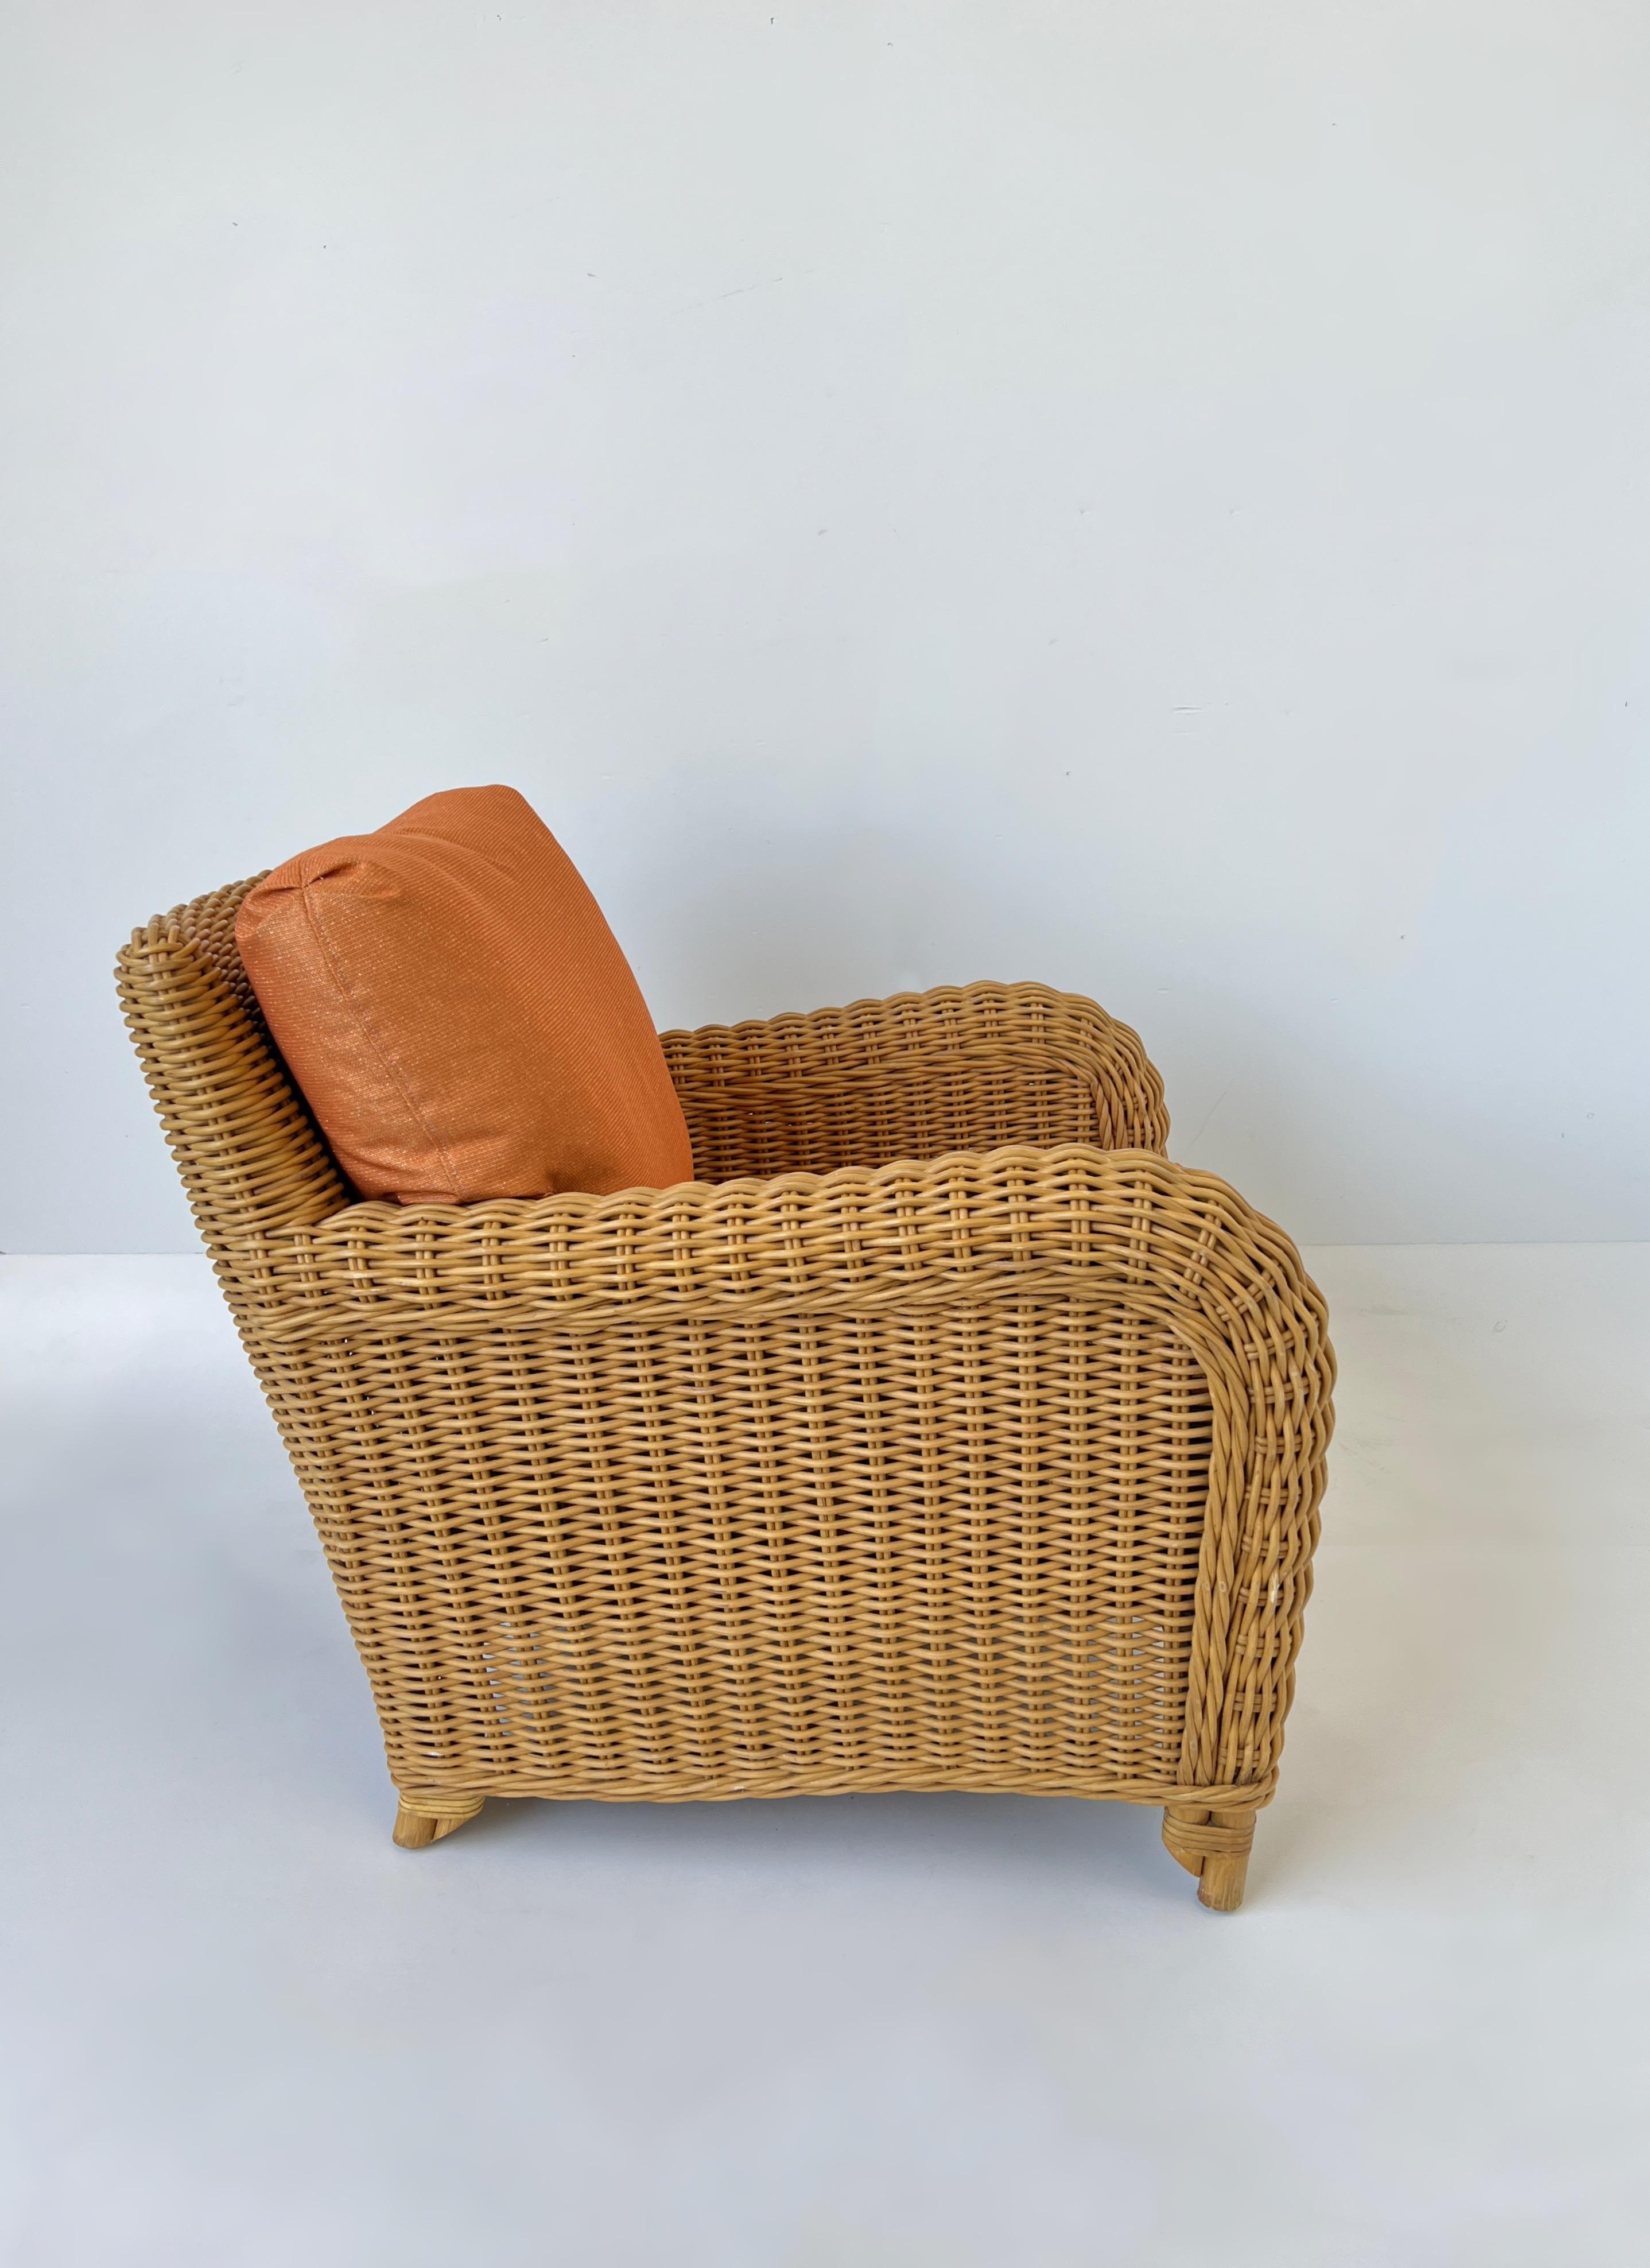 1980’s Rattan and orange lounge chair by John Hutton for Donghia. 
The frame is in original condition, it shows minor wear consistent with age. 
The cushion are newly recovered in a orange with gold thread and are down fill. 
Measurements: 31” Wide,